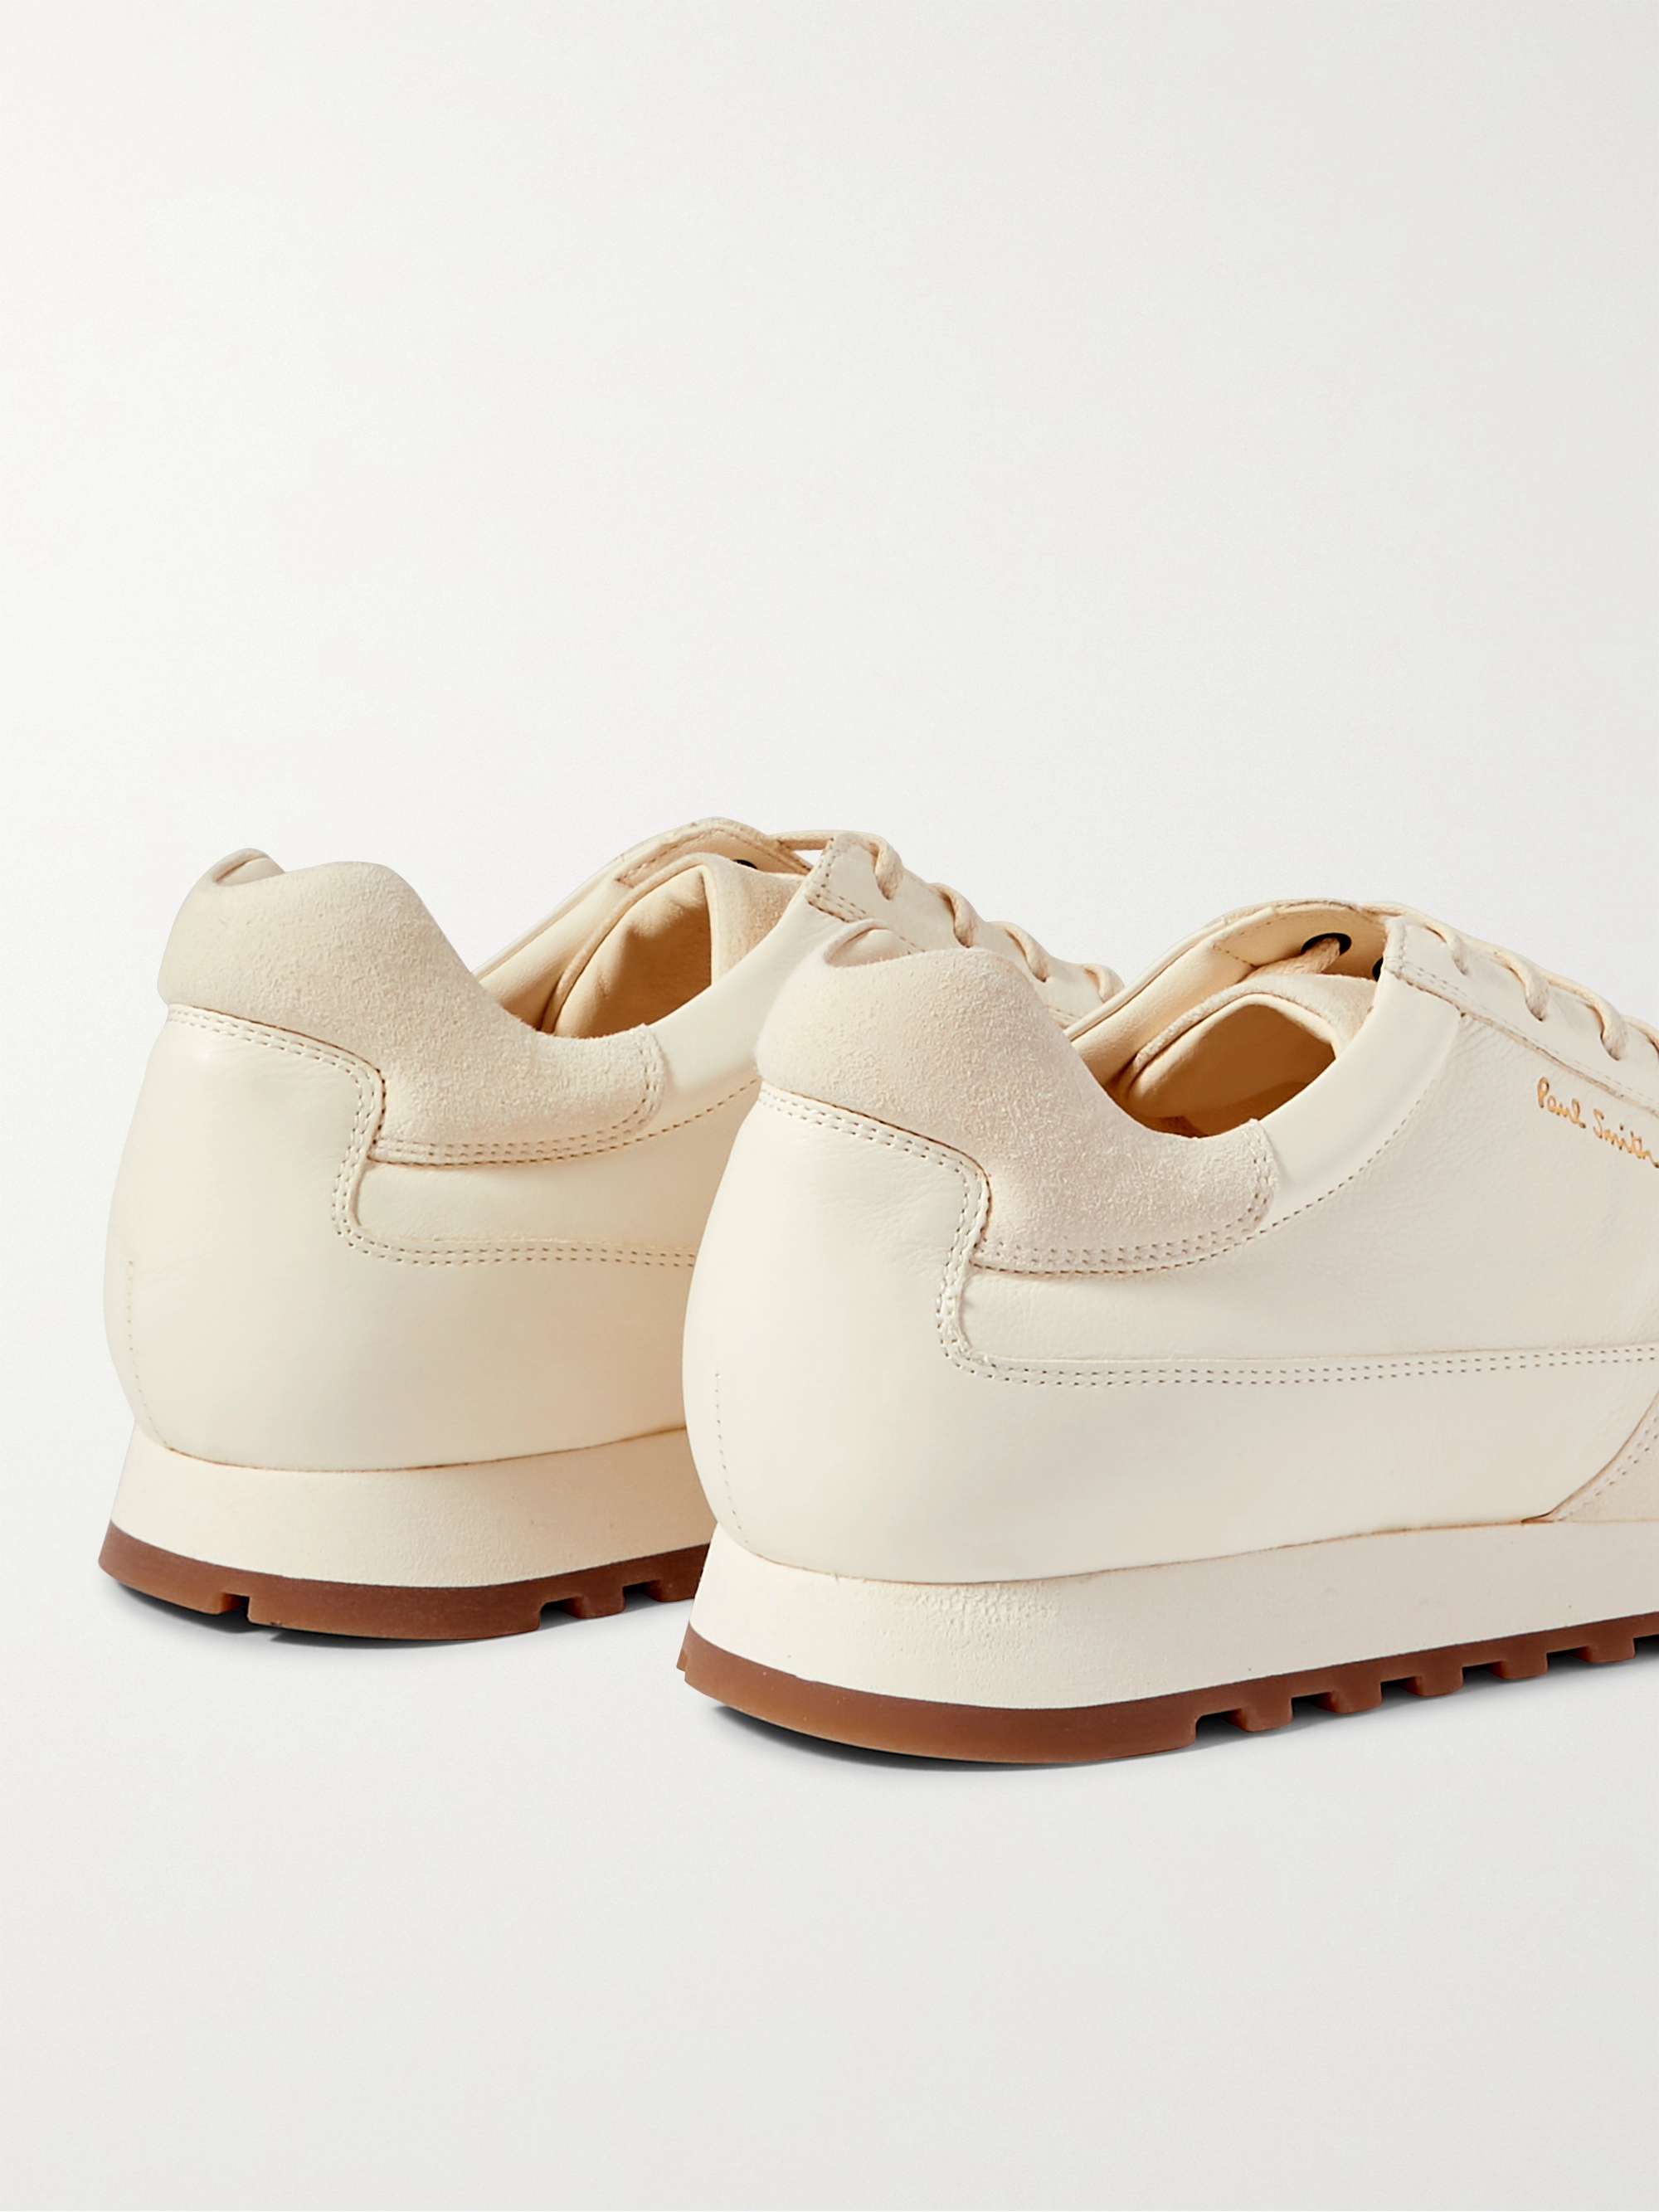 PAUL SMITH Velo Suede and Full-Grain Leather Sneakers